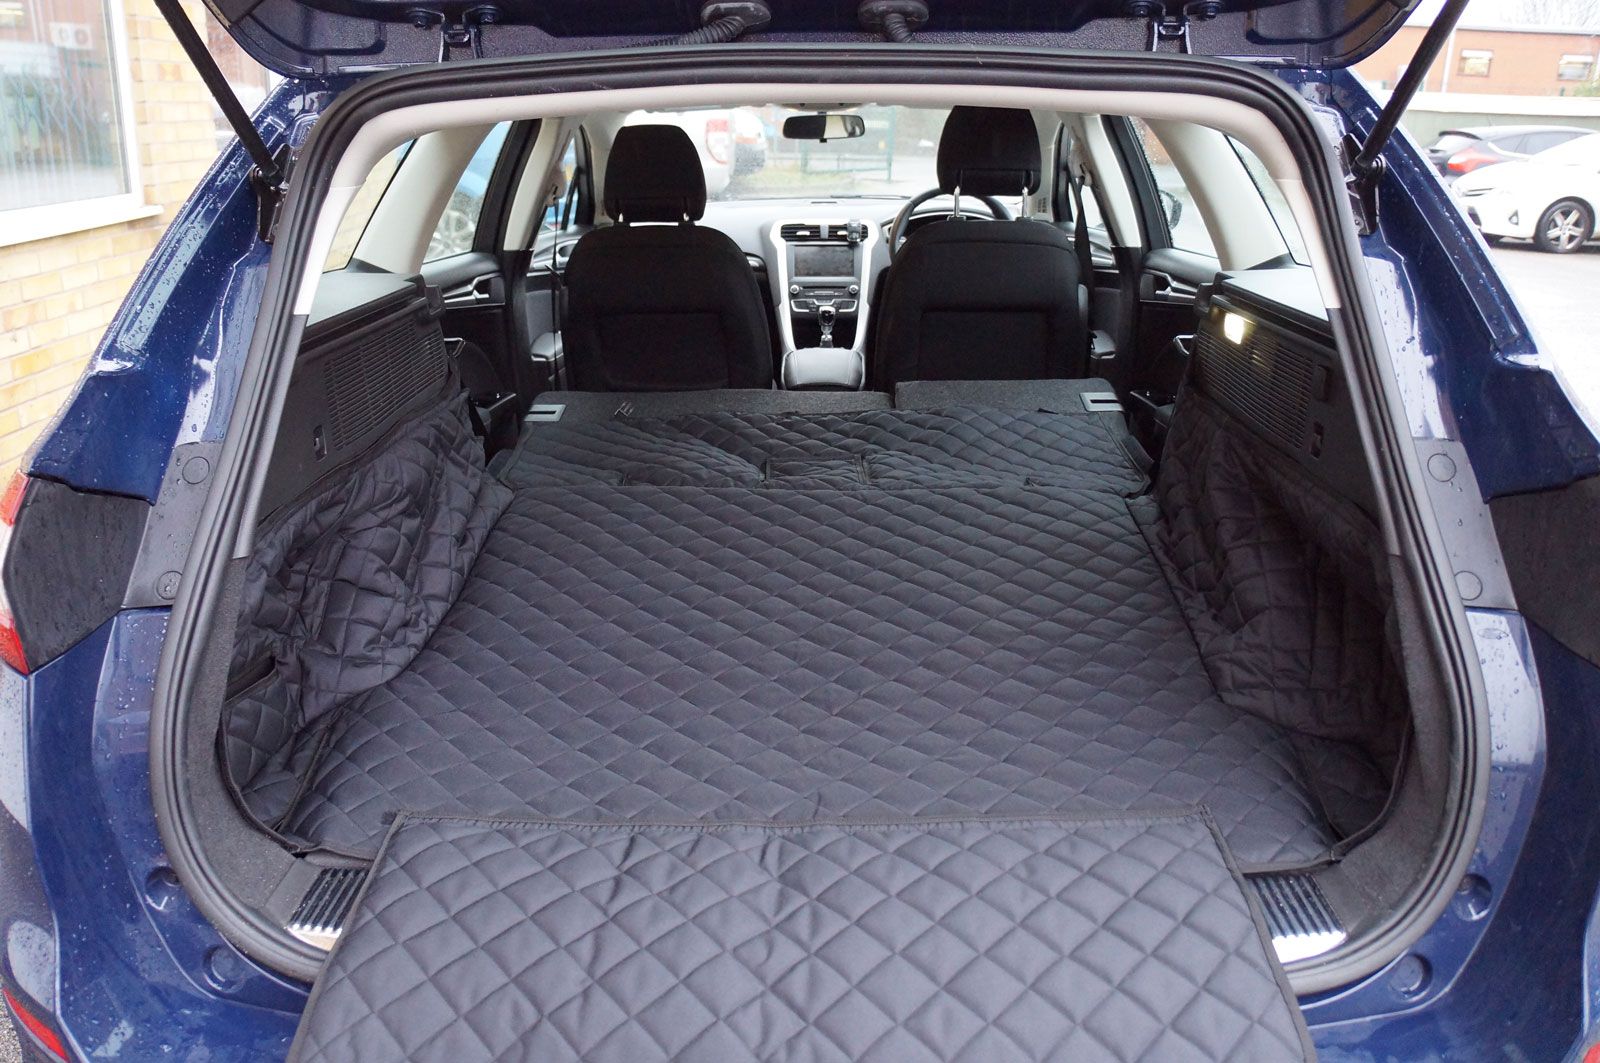 Ford Mondeo Estate boot liner with folded down rear seats